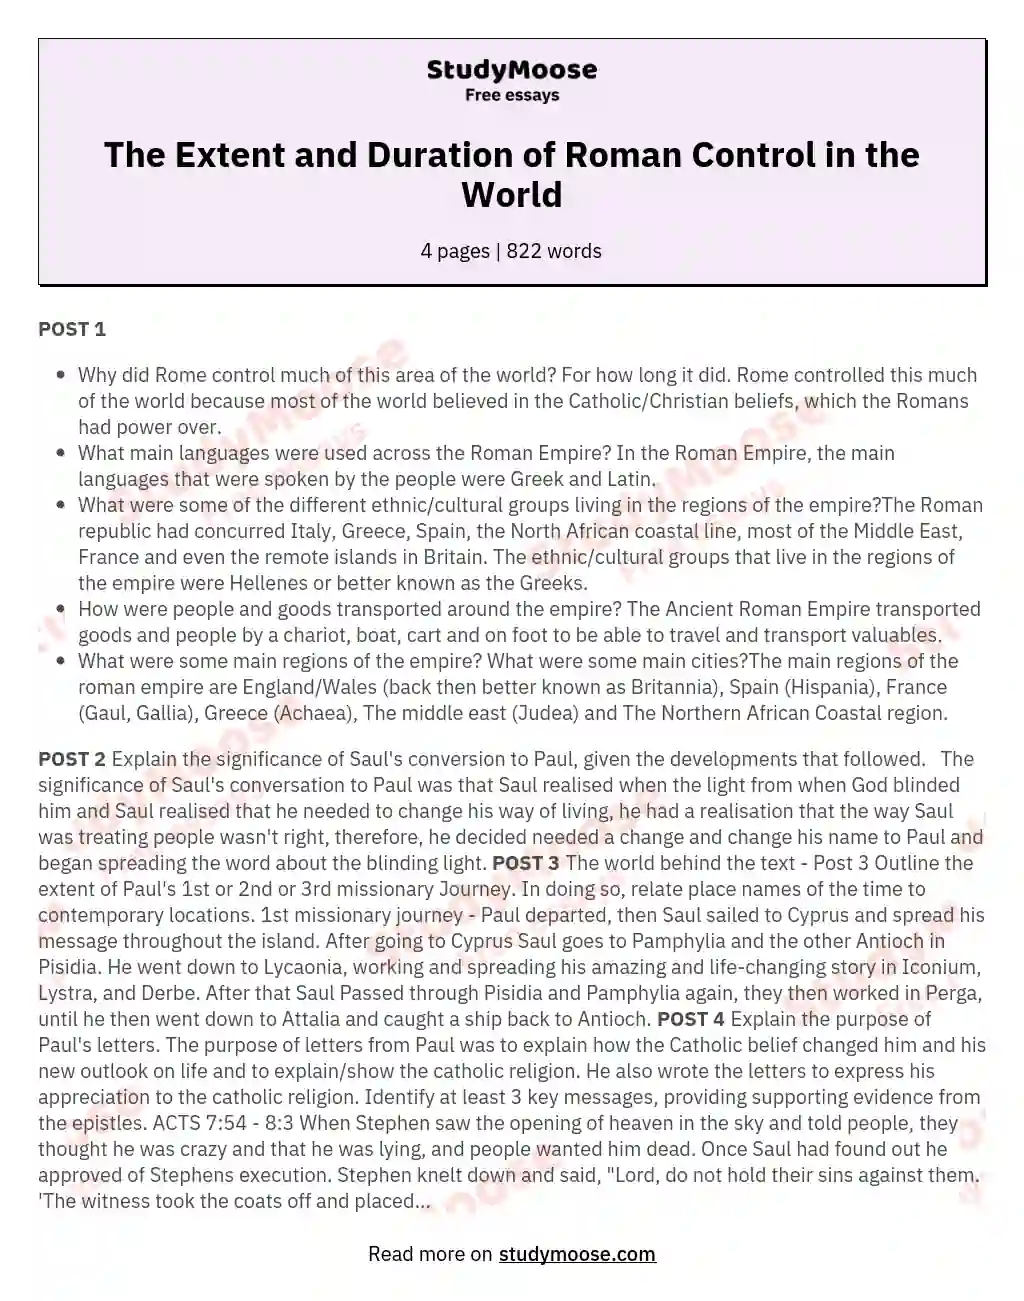 The Extent and Duration of Roman Control in the World essay